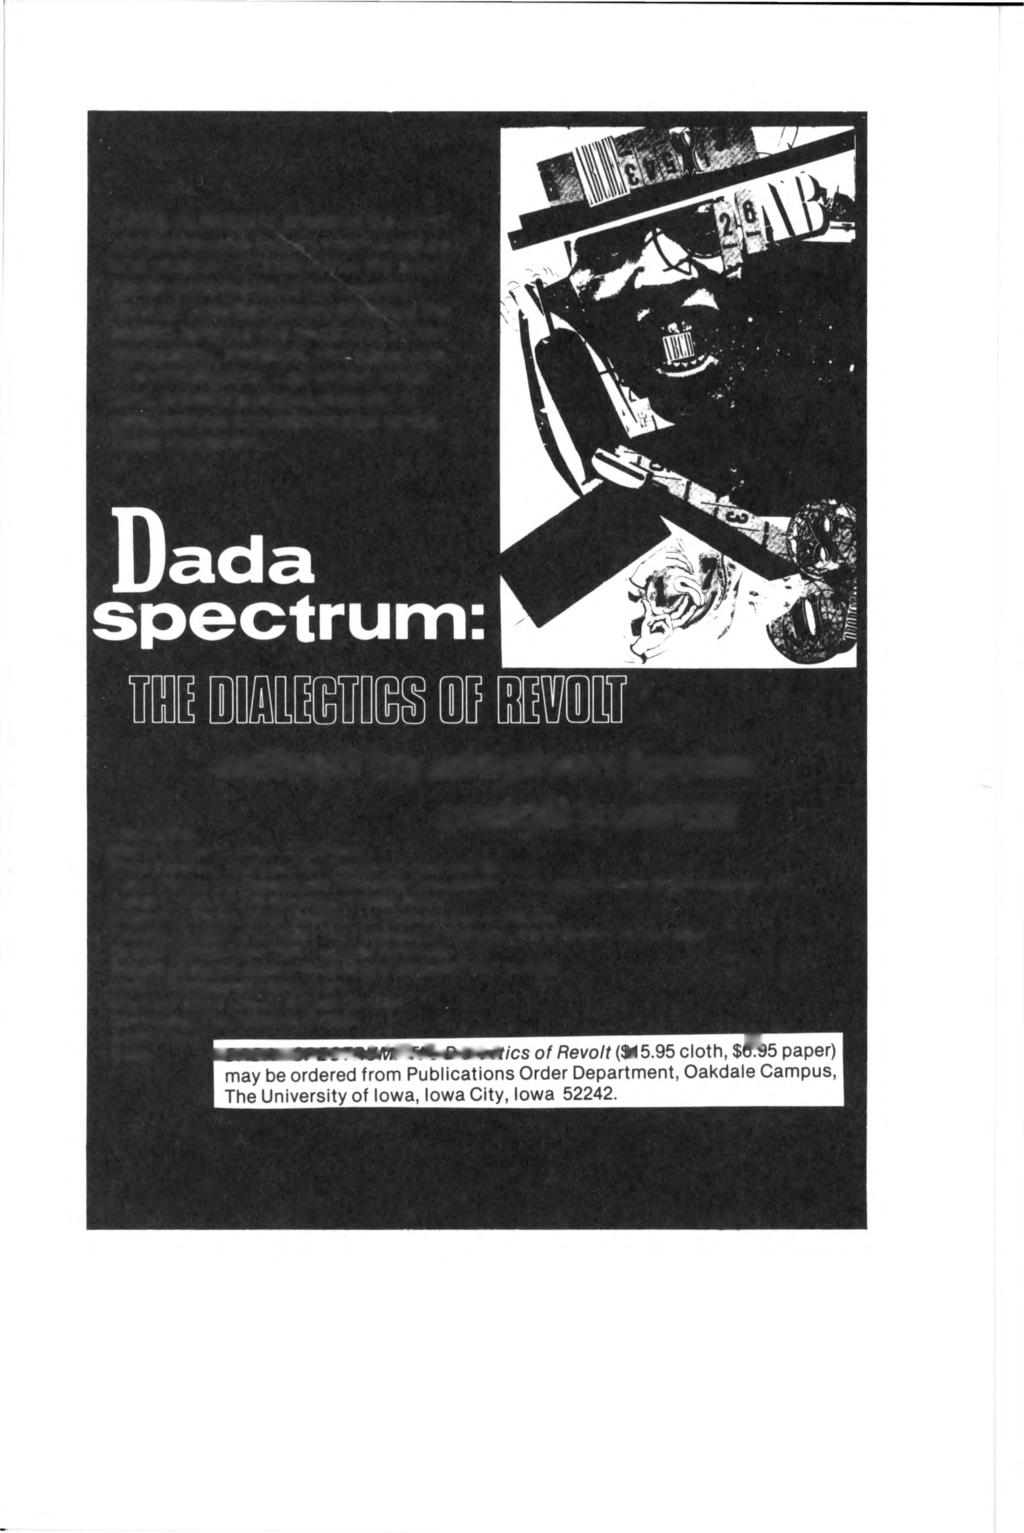 Dada Spectrum presents the most comprehensive inquiry into the nature and position of Dada within the avant garde movements of the twentieth century.